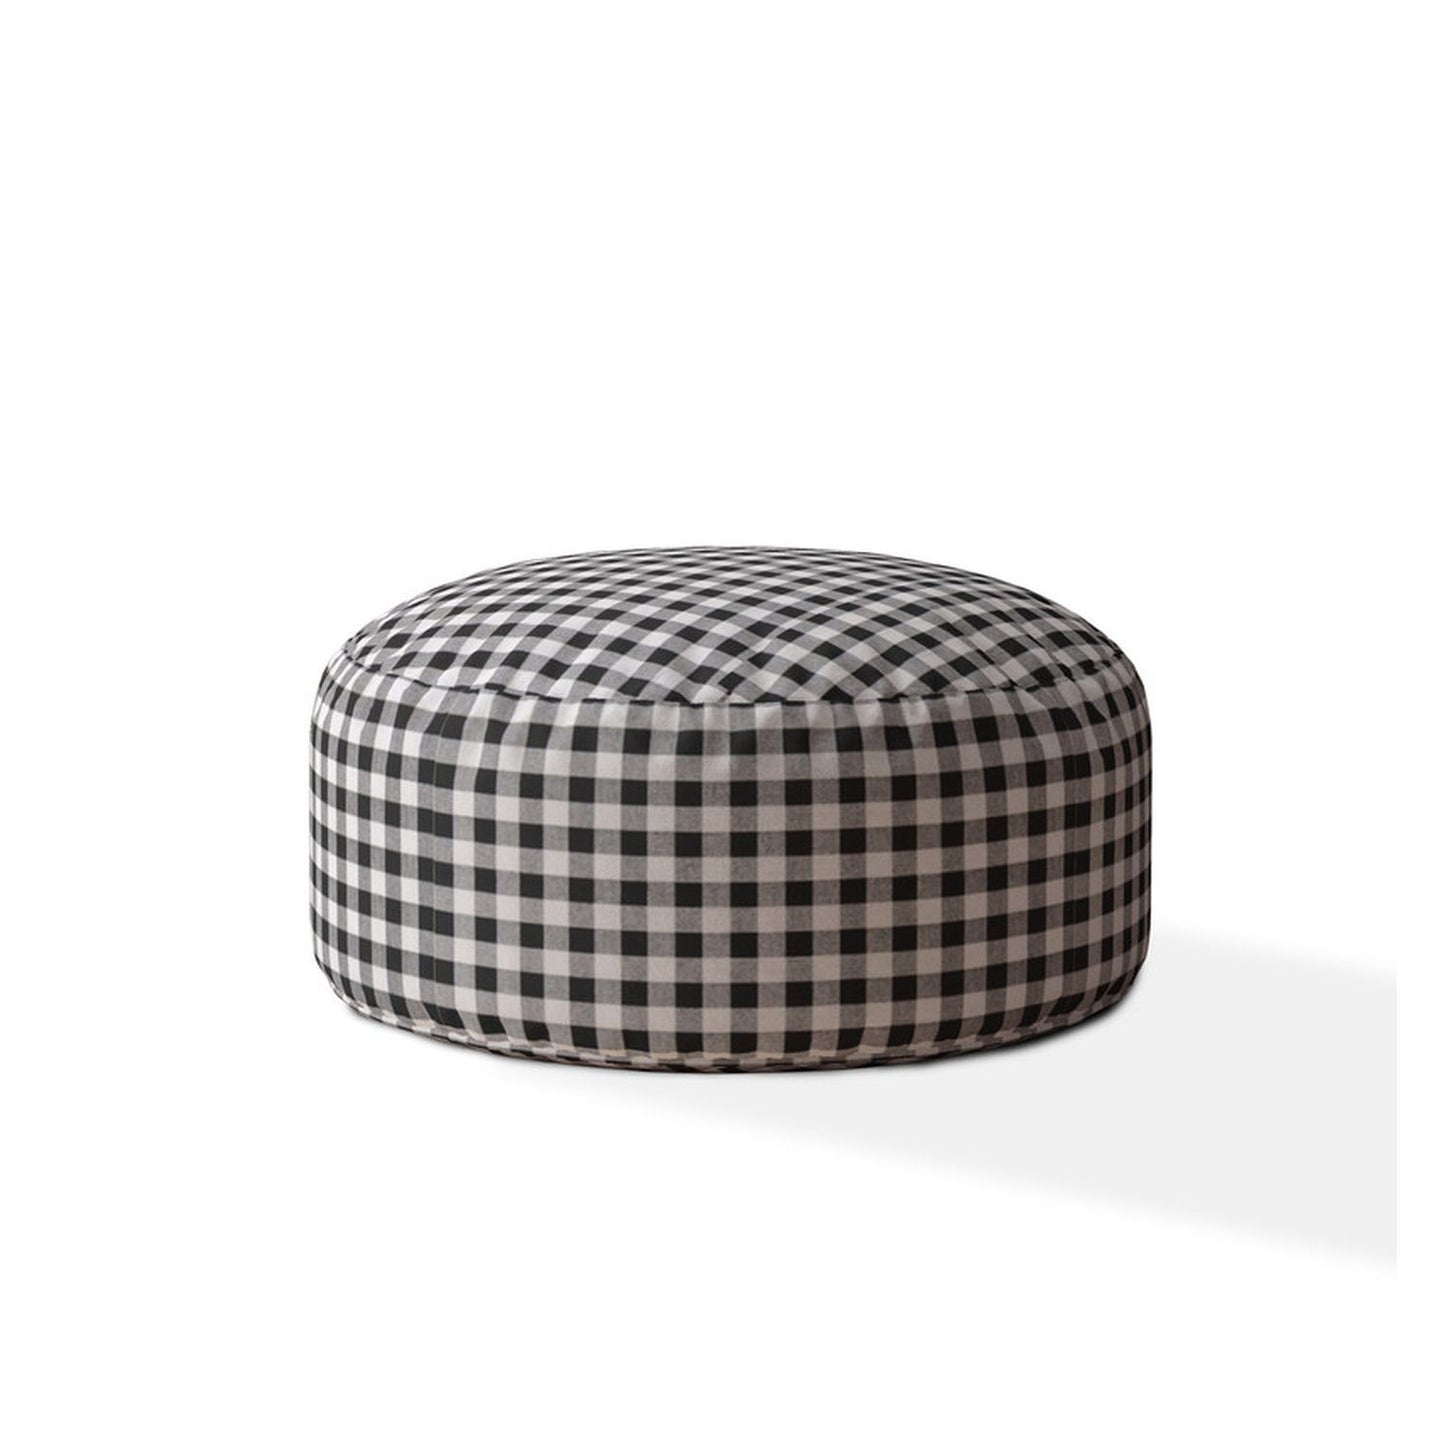 Indoor PLAIDO Black Round Zipper Pouf - Cover Only - 24in dia x 20in tall